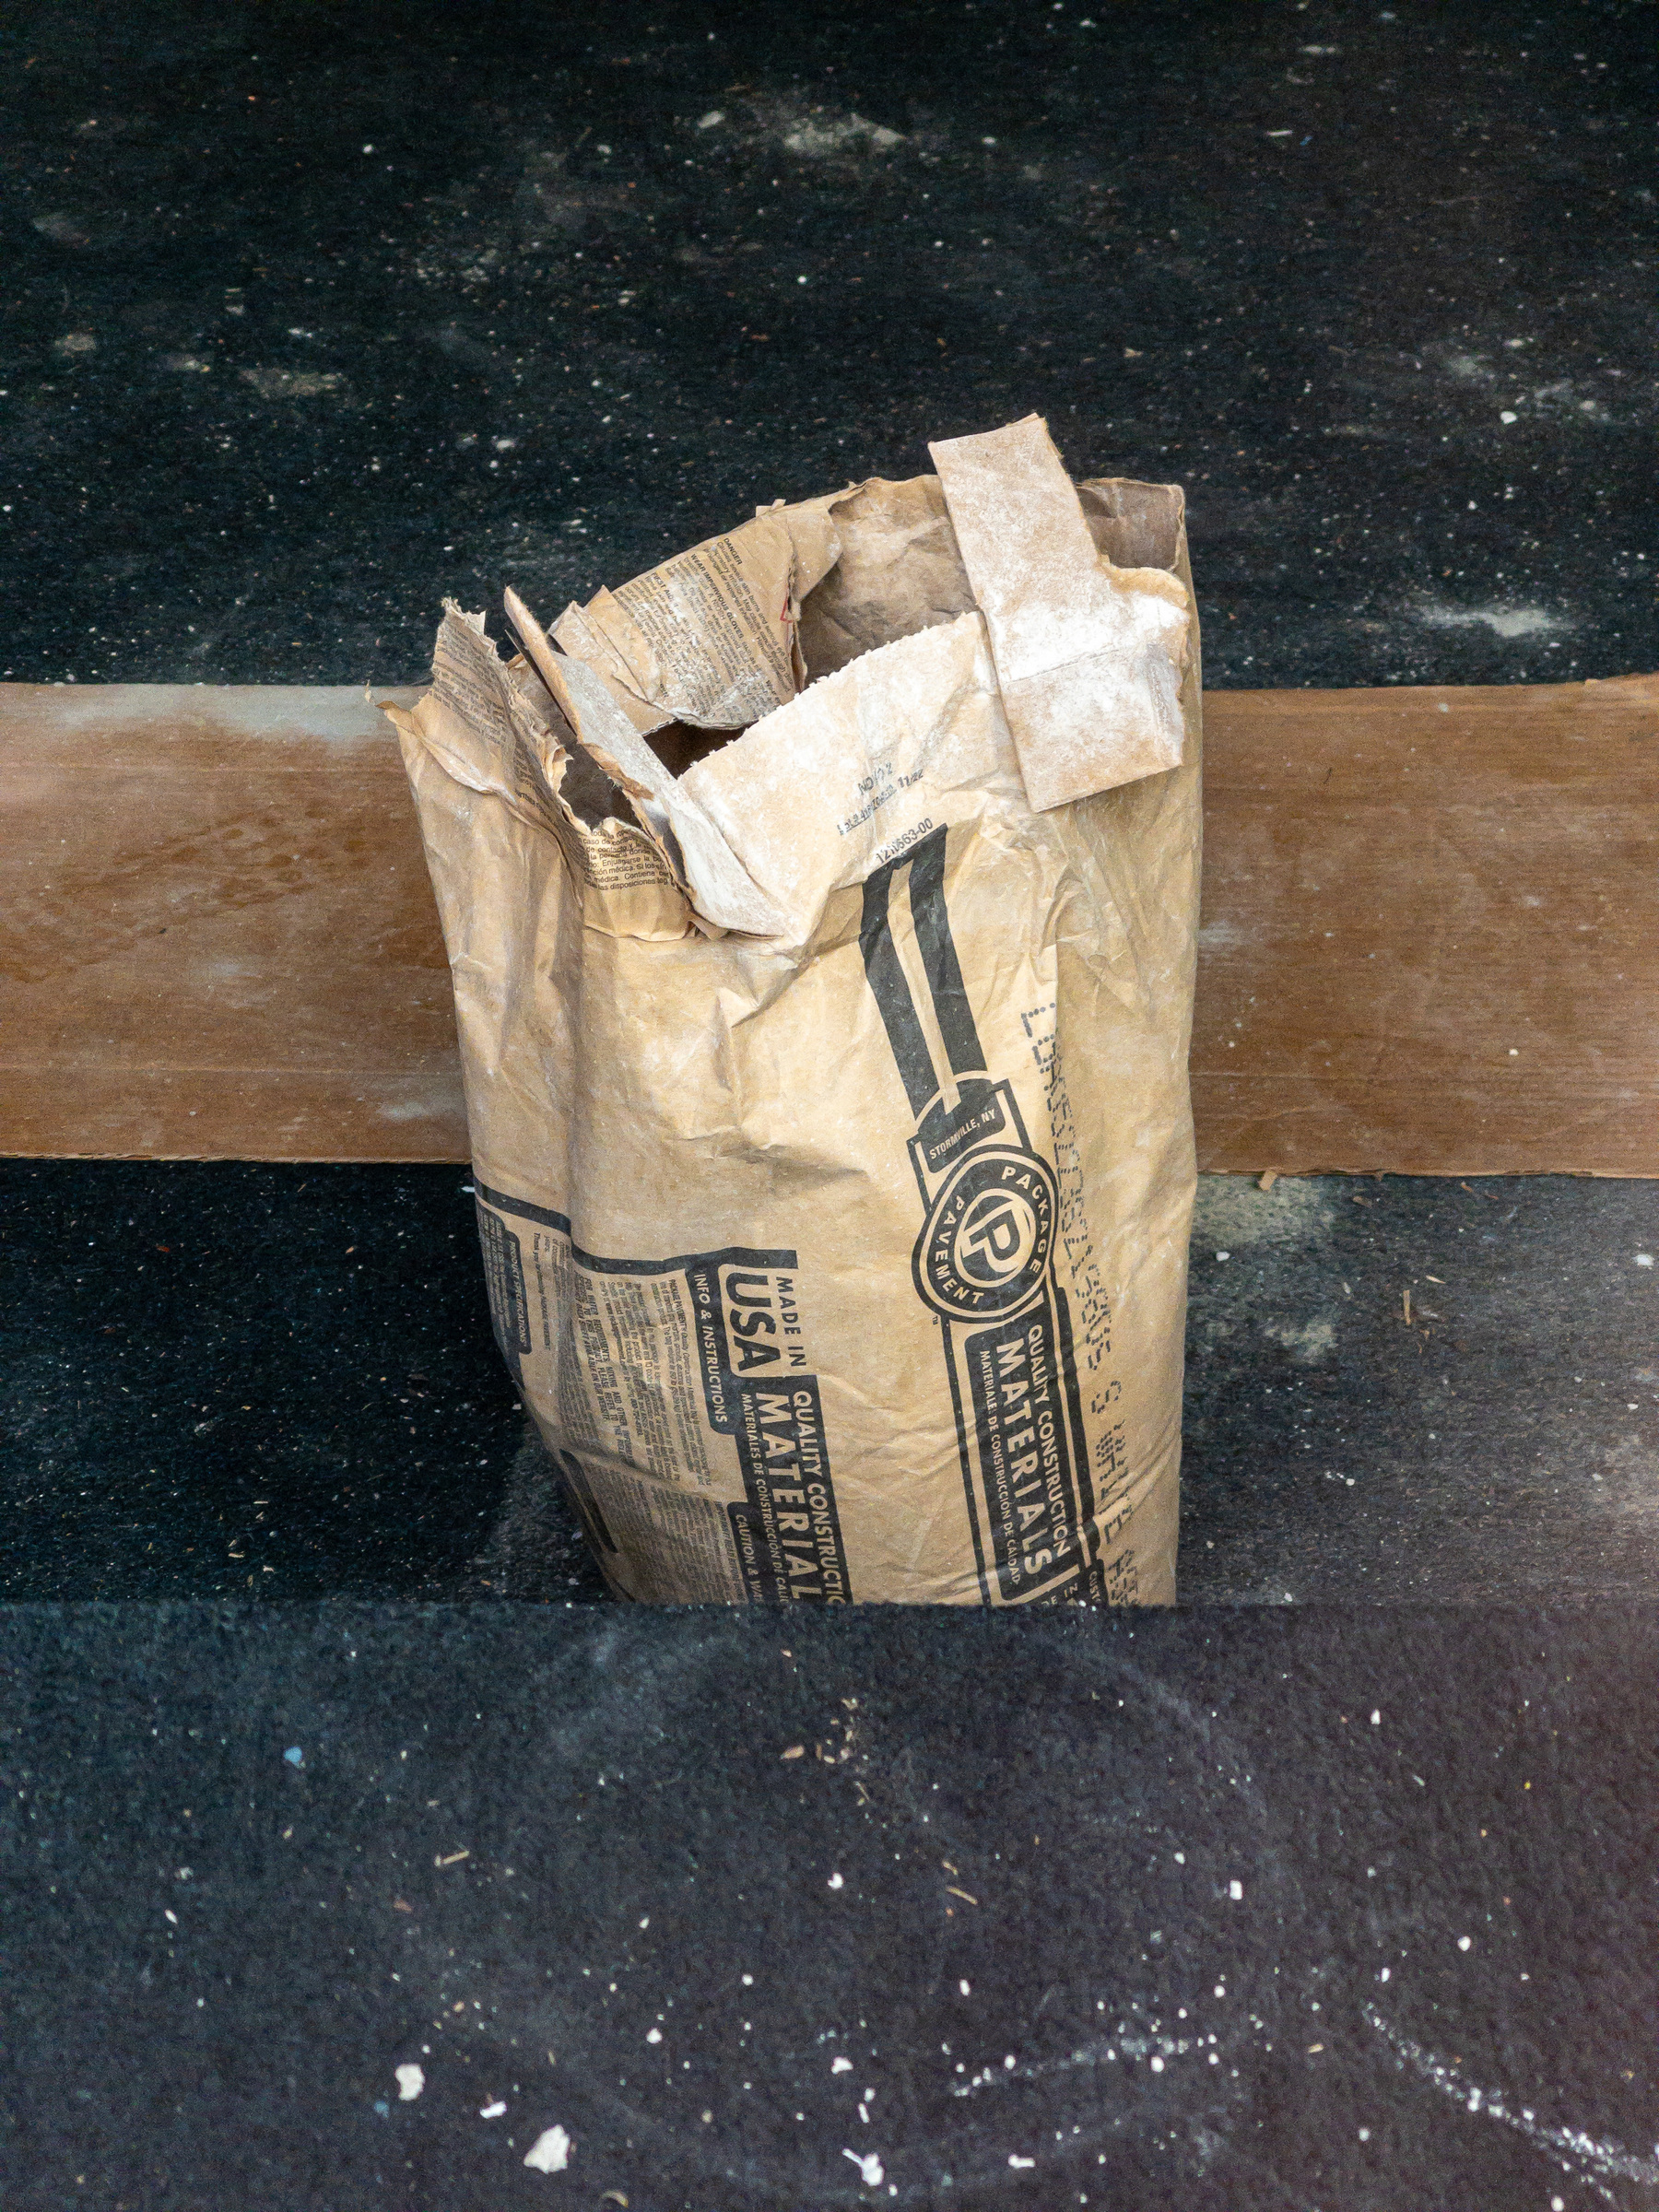 Bag of construction material standing on the floor of a shop being renovated.